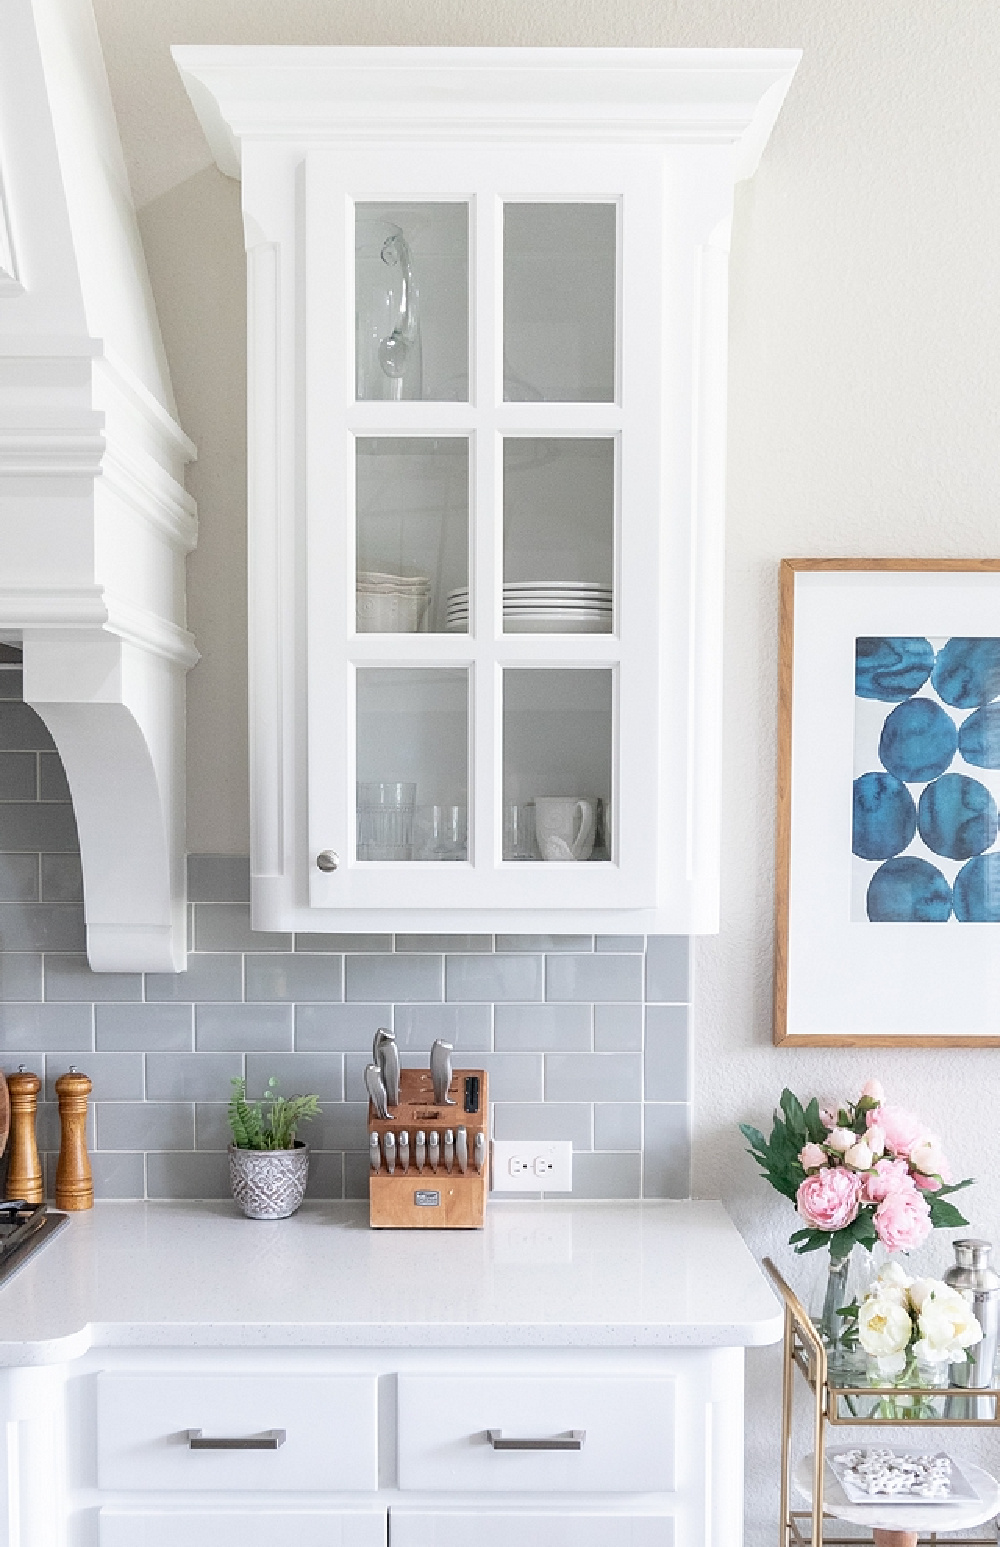 Chantilly Lace (Benjamin Moore) painted cabinets in a lovely white kitchen by Simplicity for Designs (photo by Audrie Dollins). #bmchantillylace #whitekitchencabinets